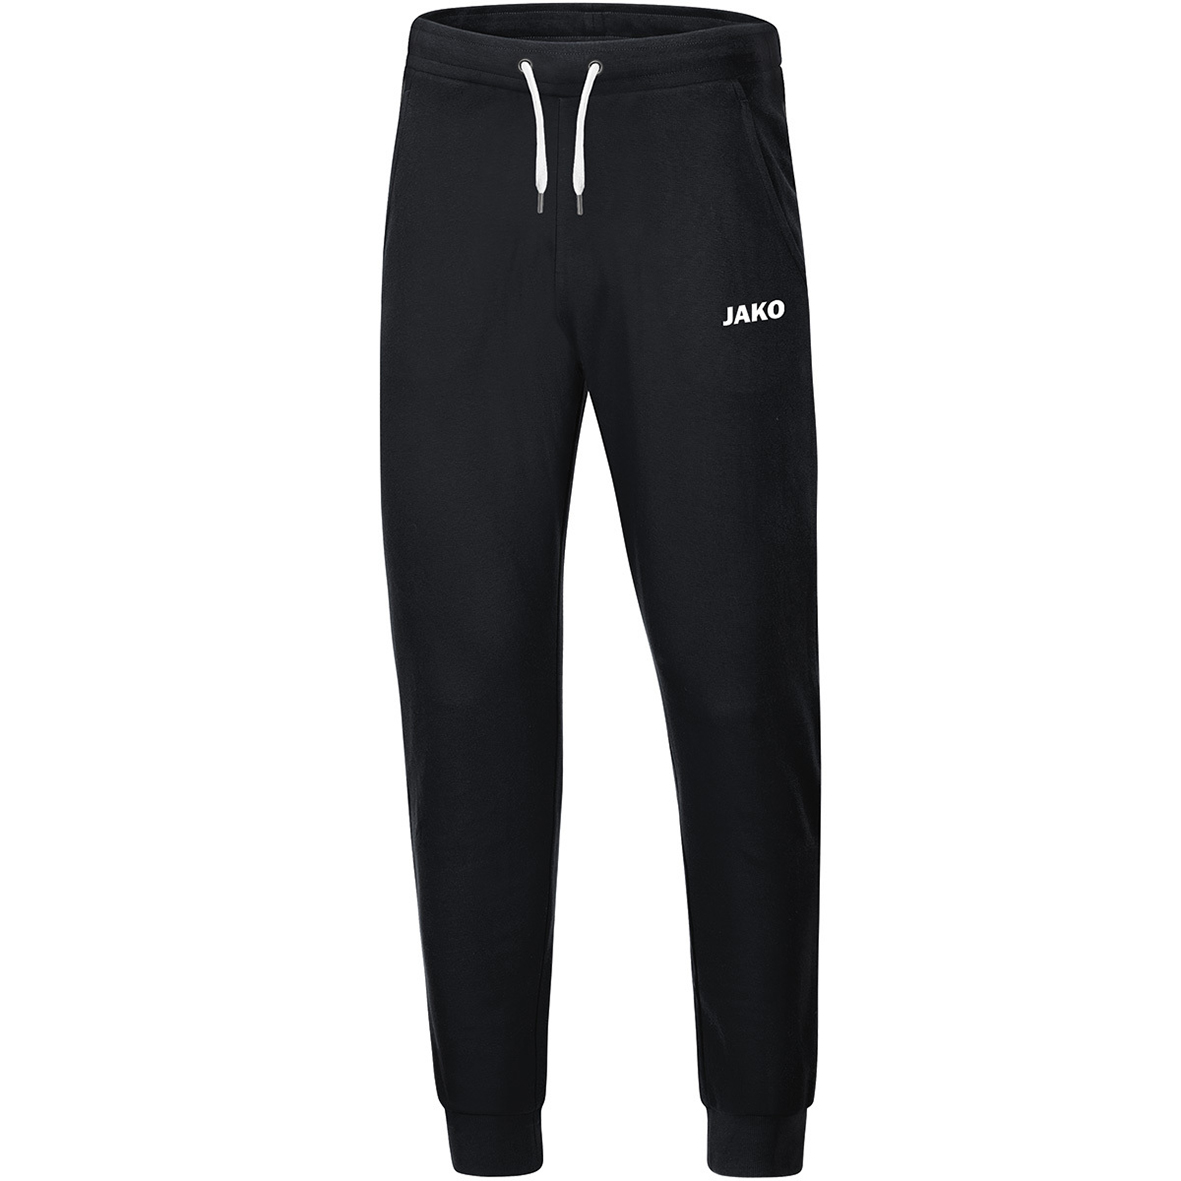 JOGGING TROUSERS JAKO BASE WITH CUFFS, BLACK MEN.